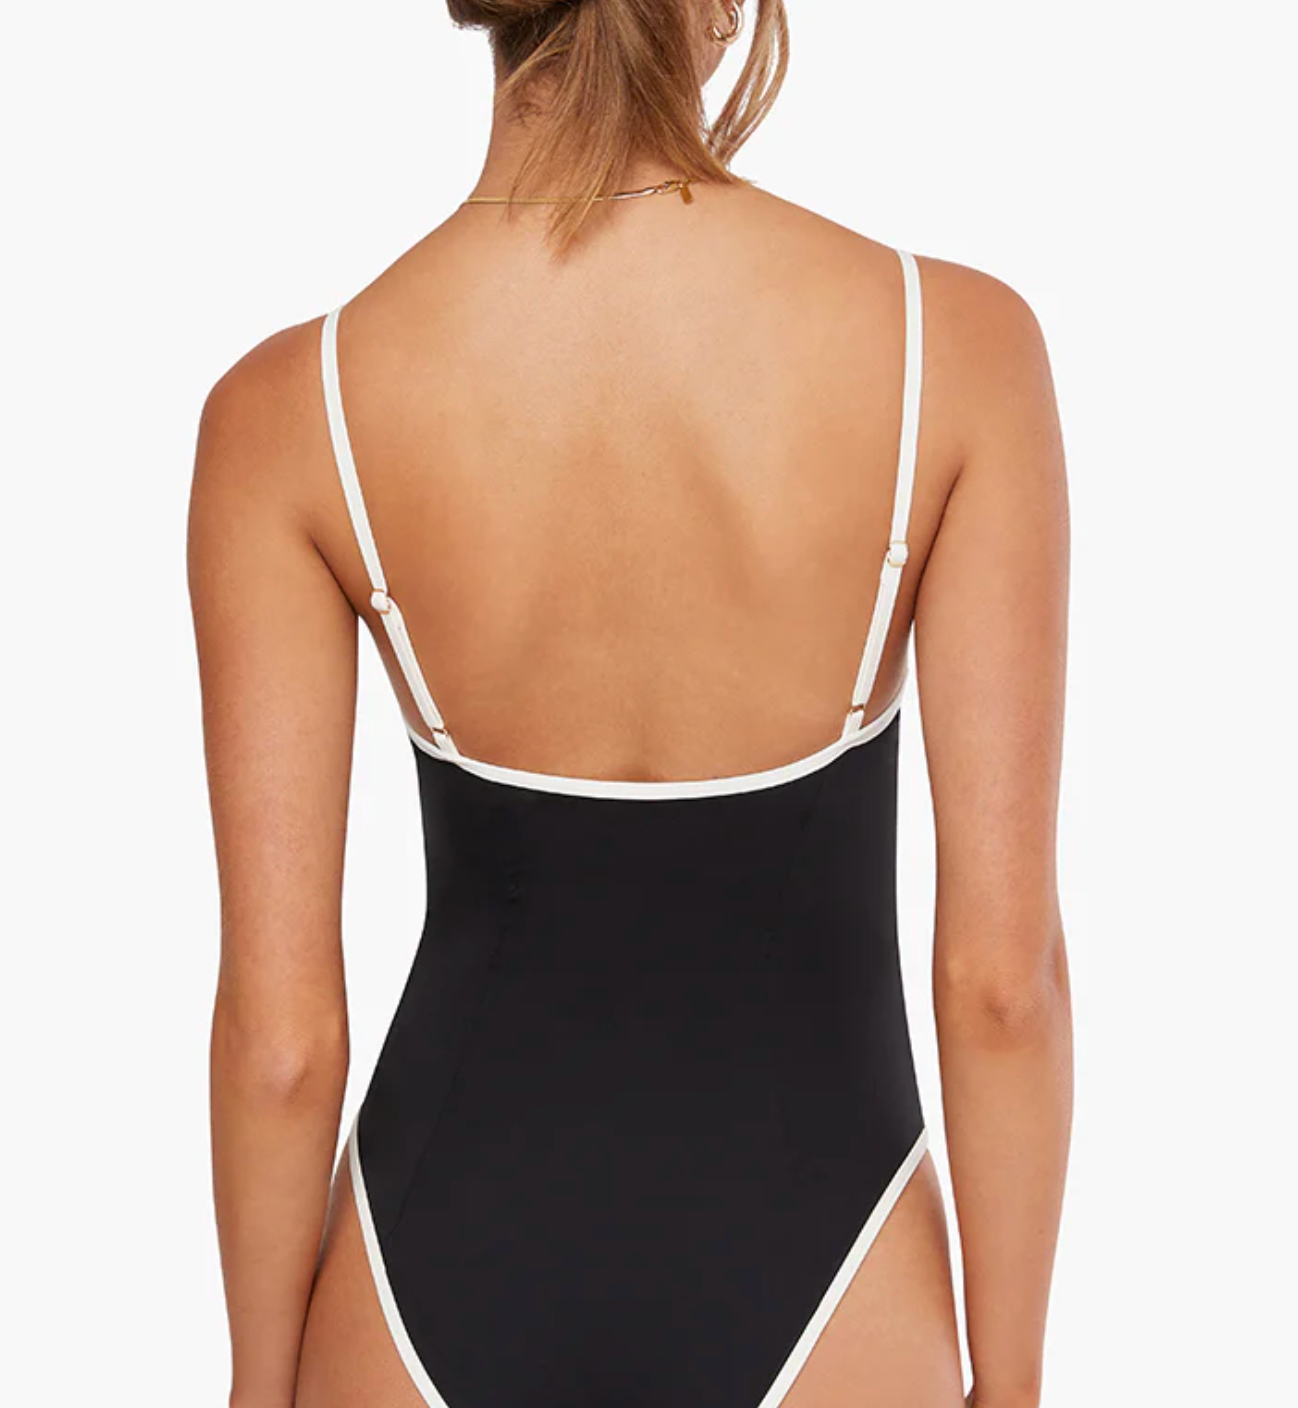 Danielle One Piece Swimsuit - Black/White - We Wore What